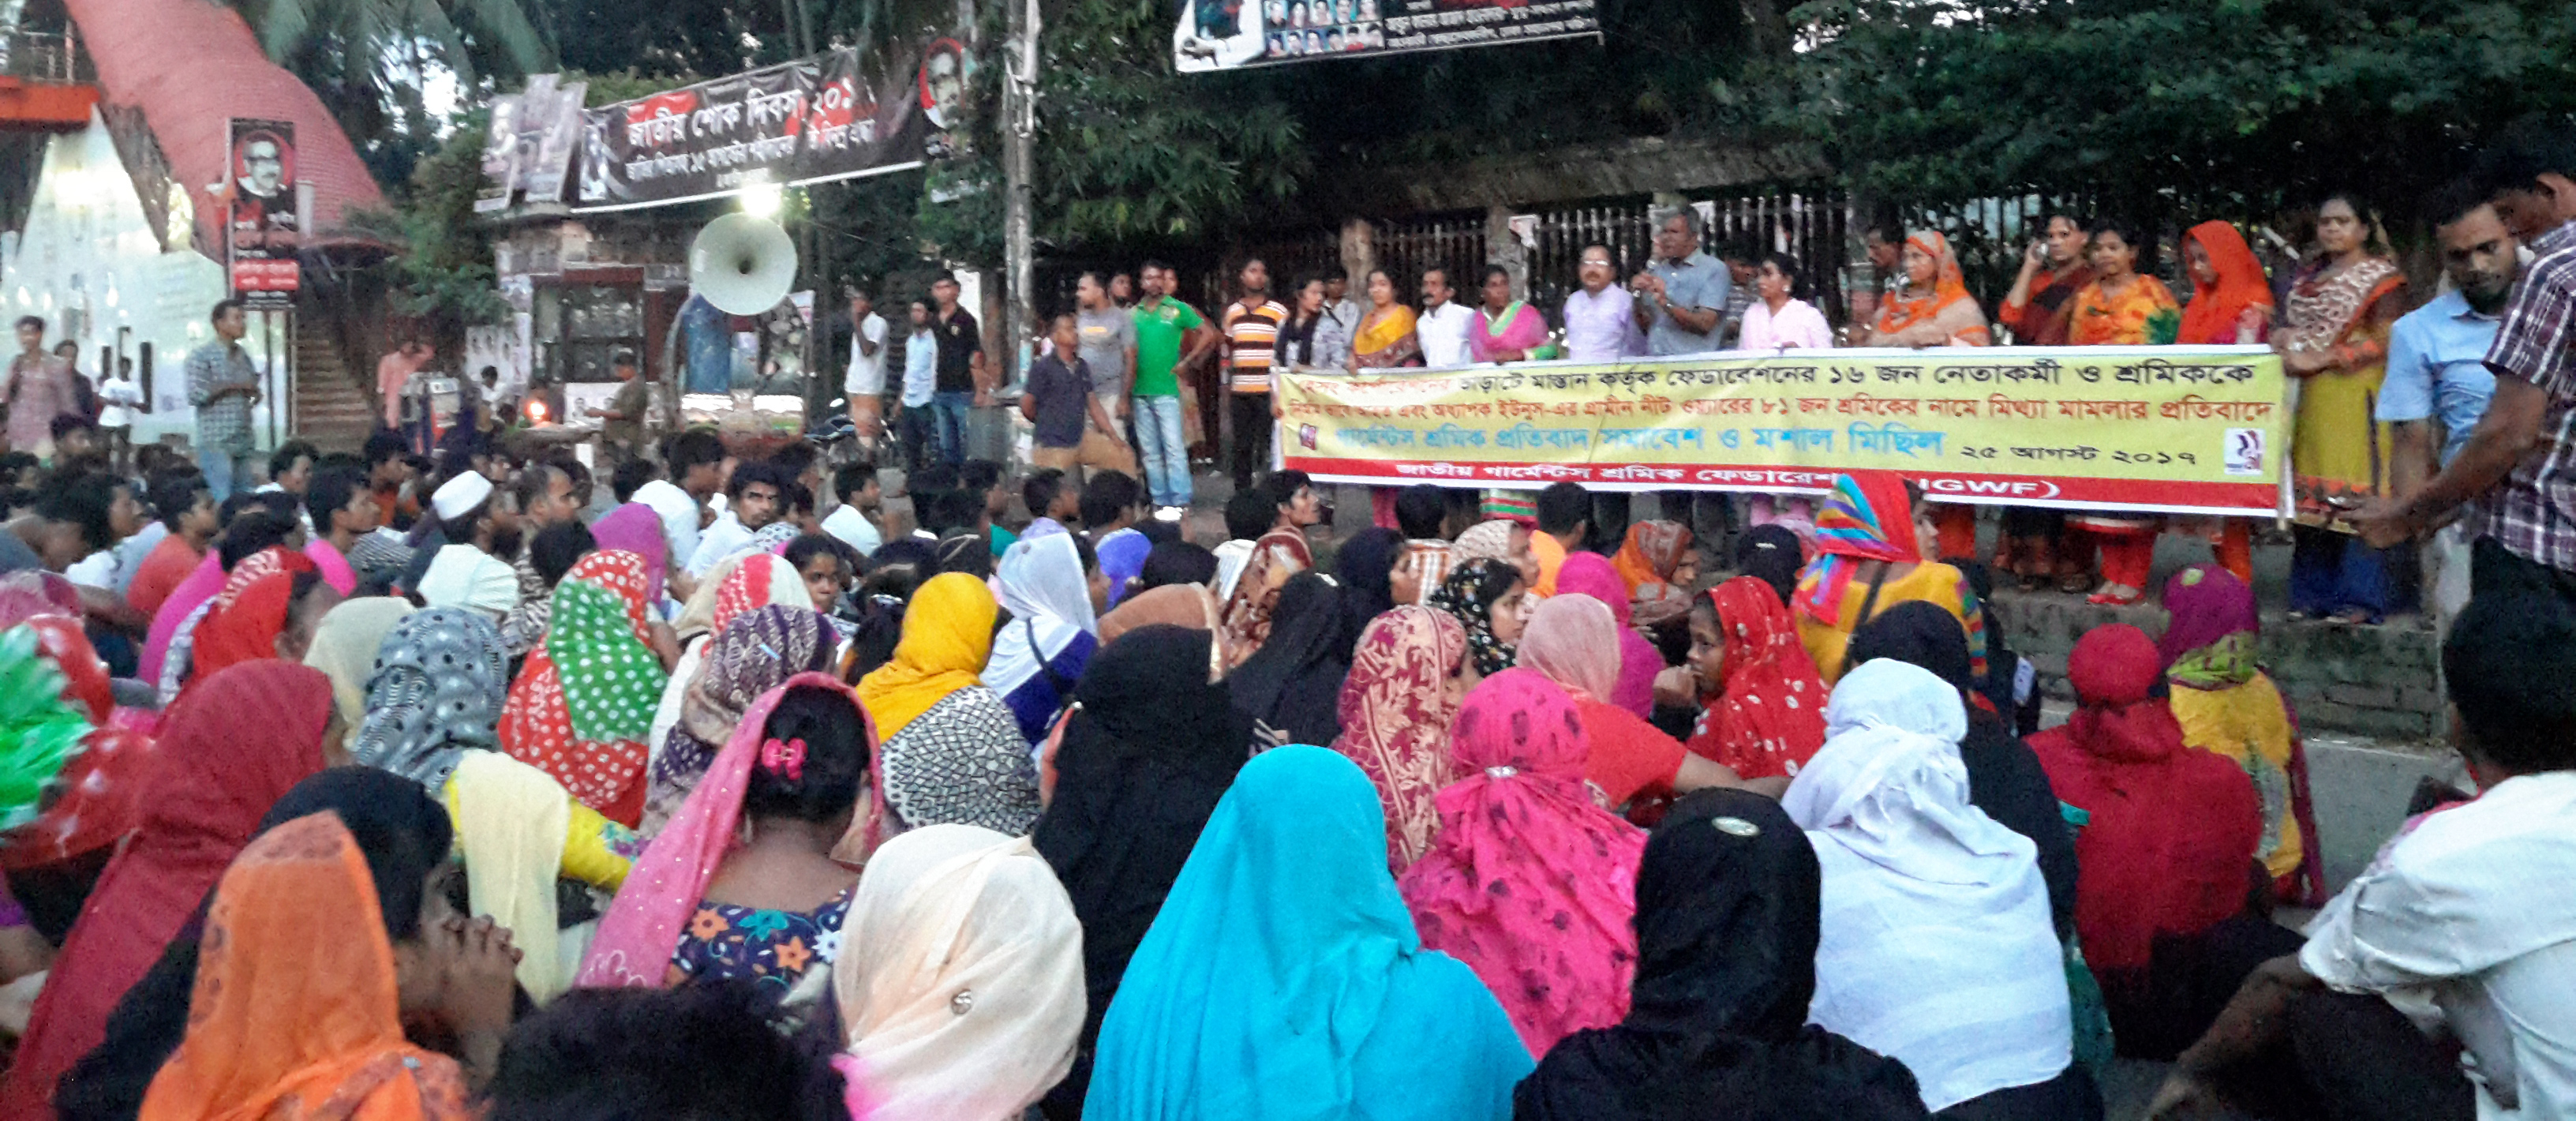 Garment Workers Protest Assembly & Torch Procession